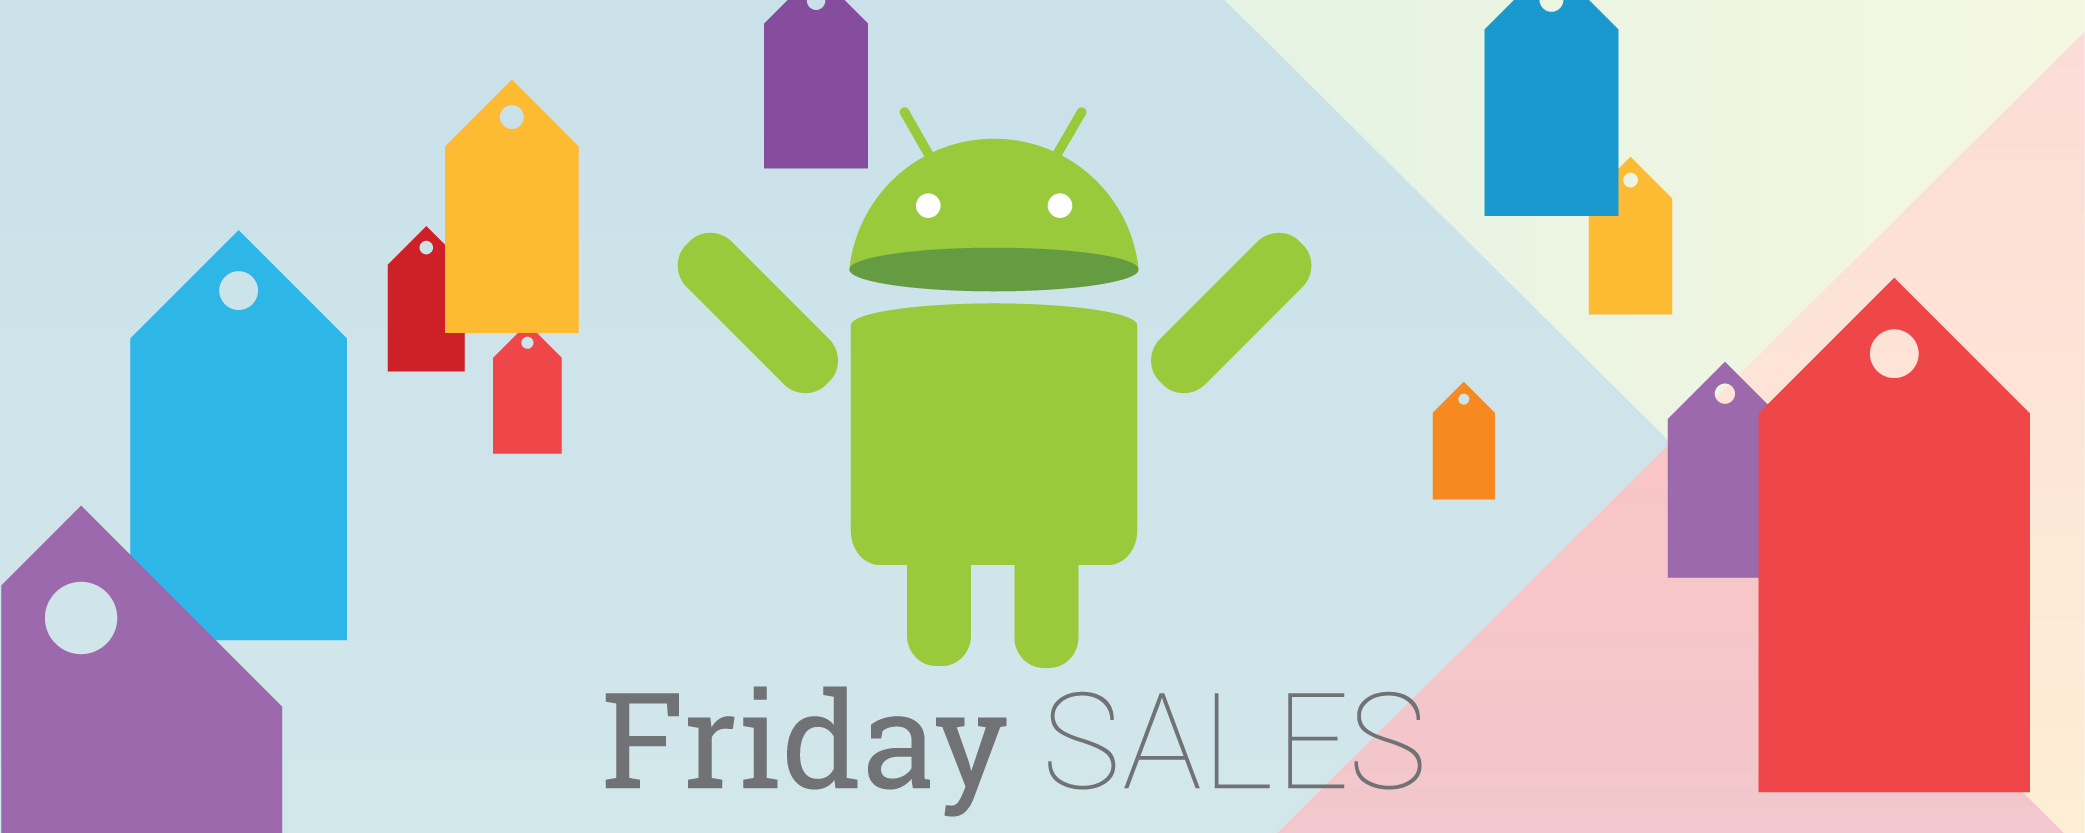 22 temporarily free and 33 on-sale apps and games for Friday